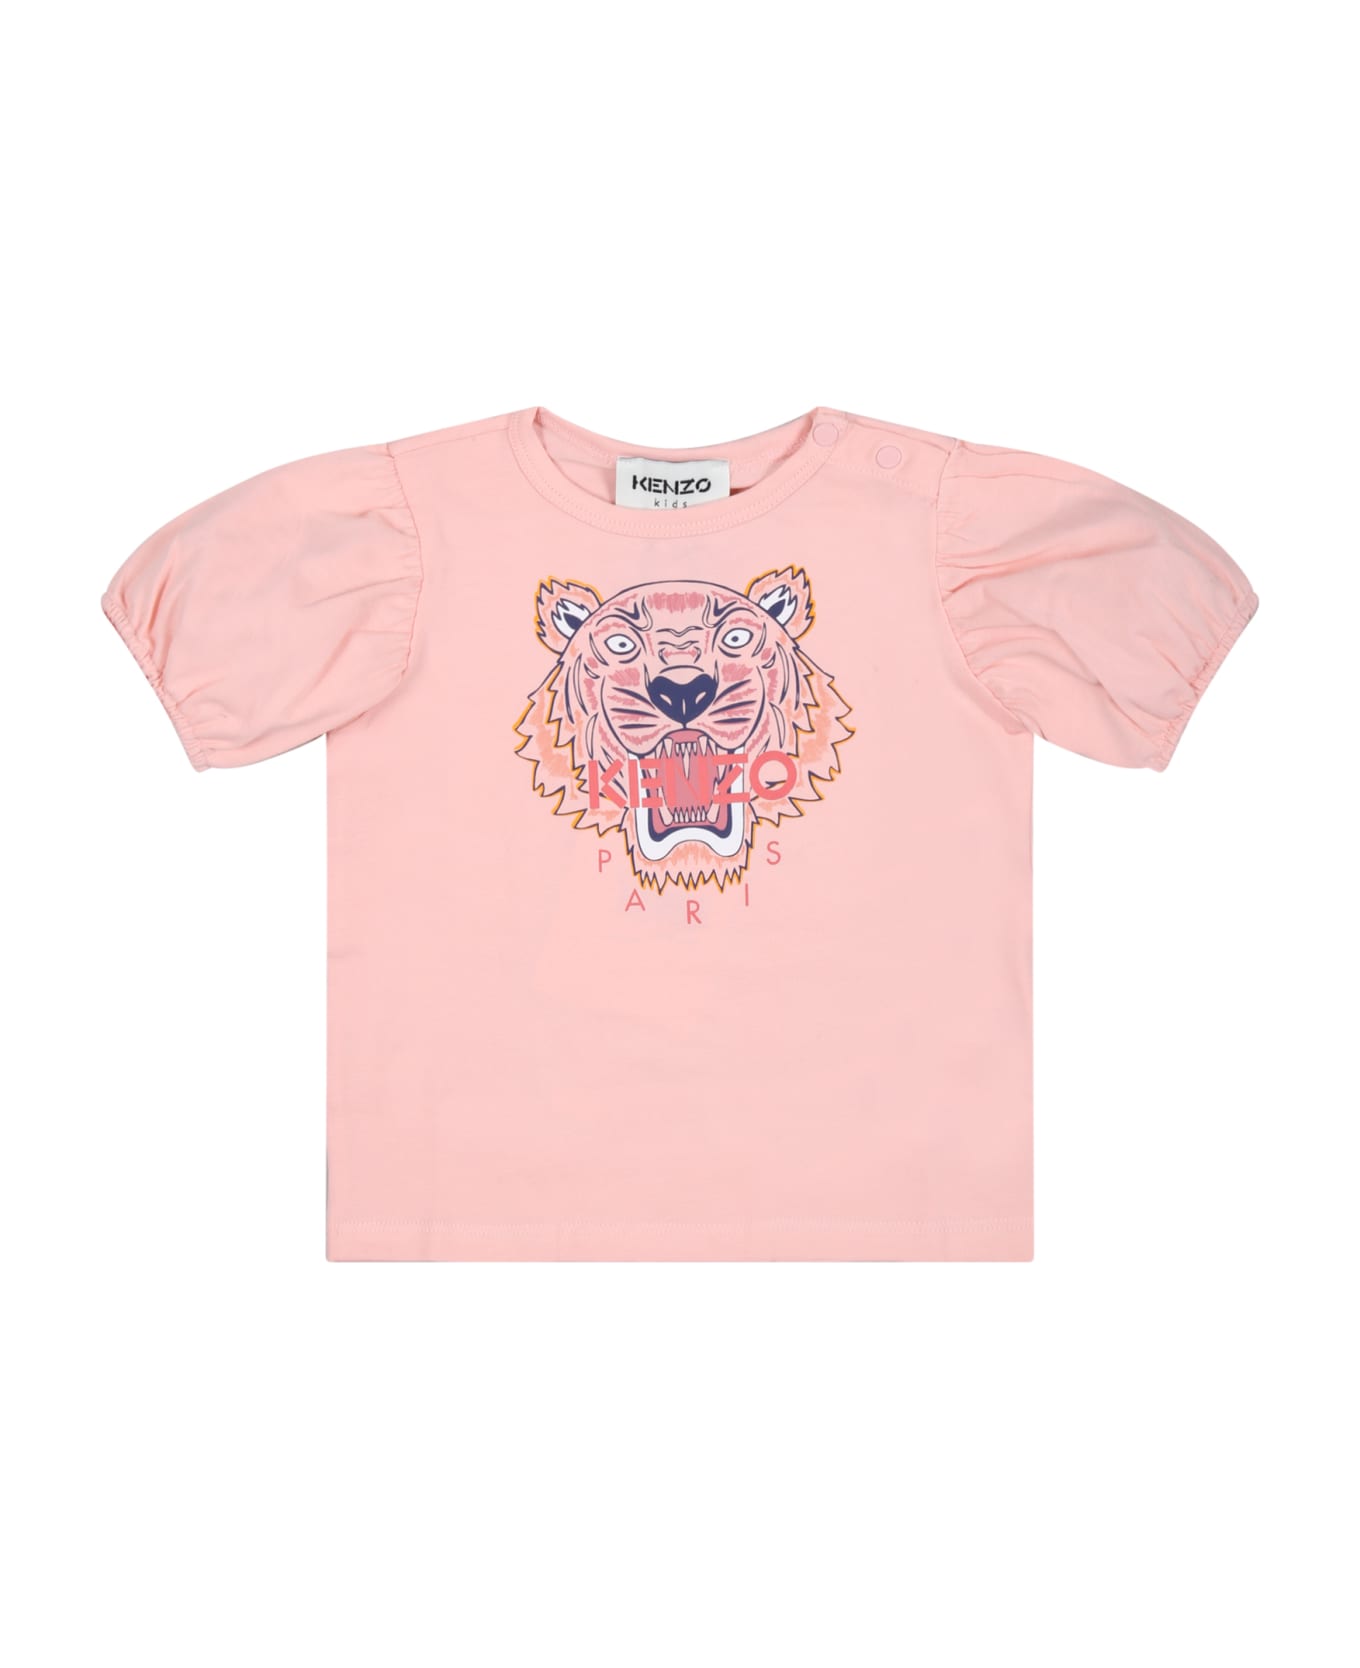 Kenzo Kids Pink T-shirt For Baby Girl With Iconic Roaring Tiger And Logo - Pink